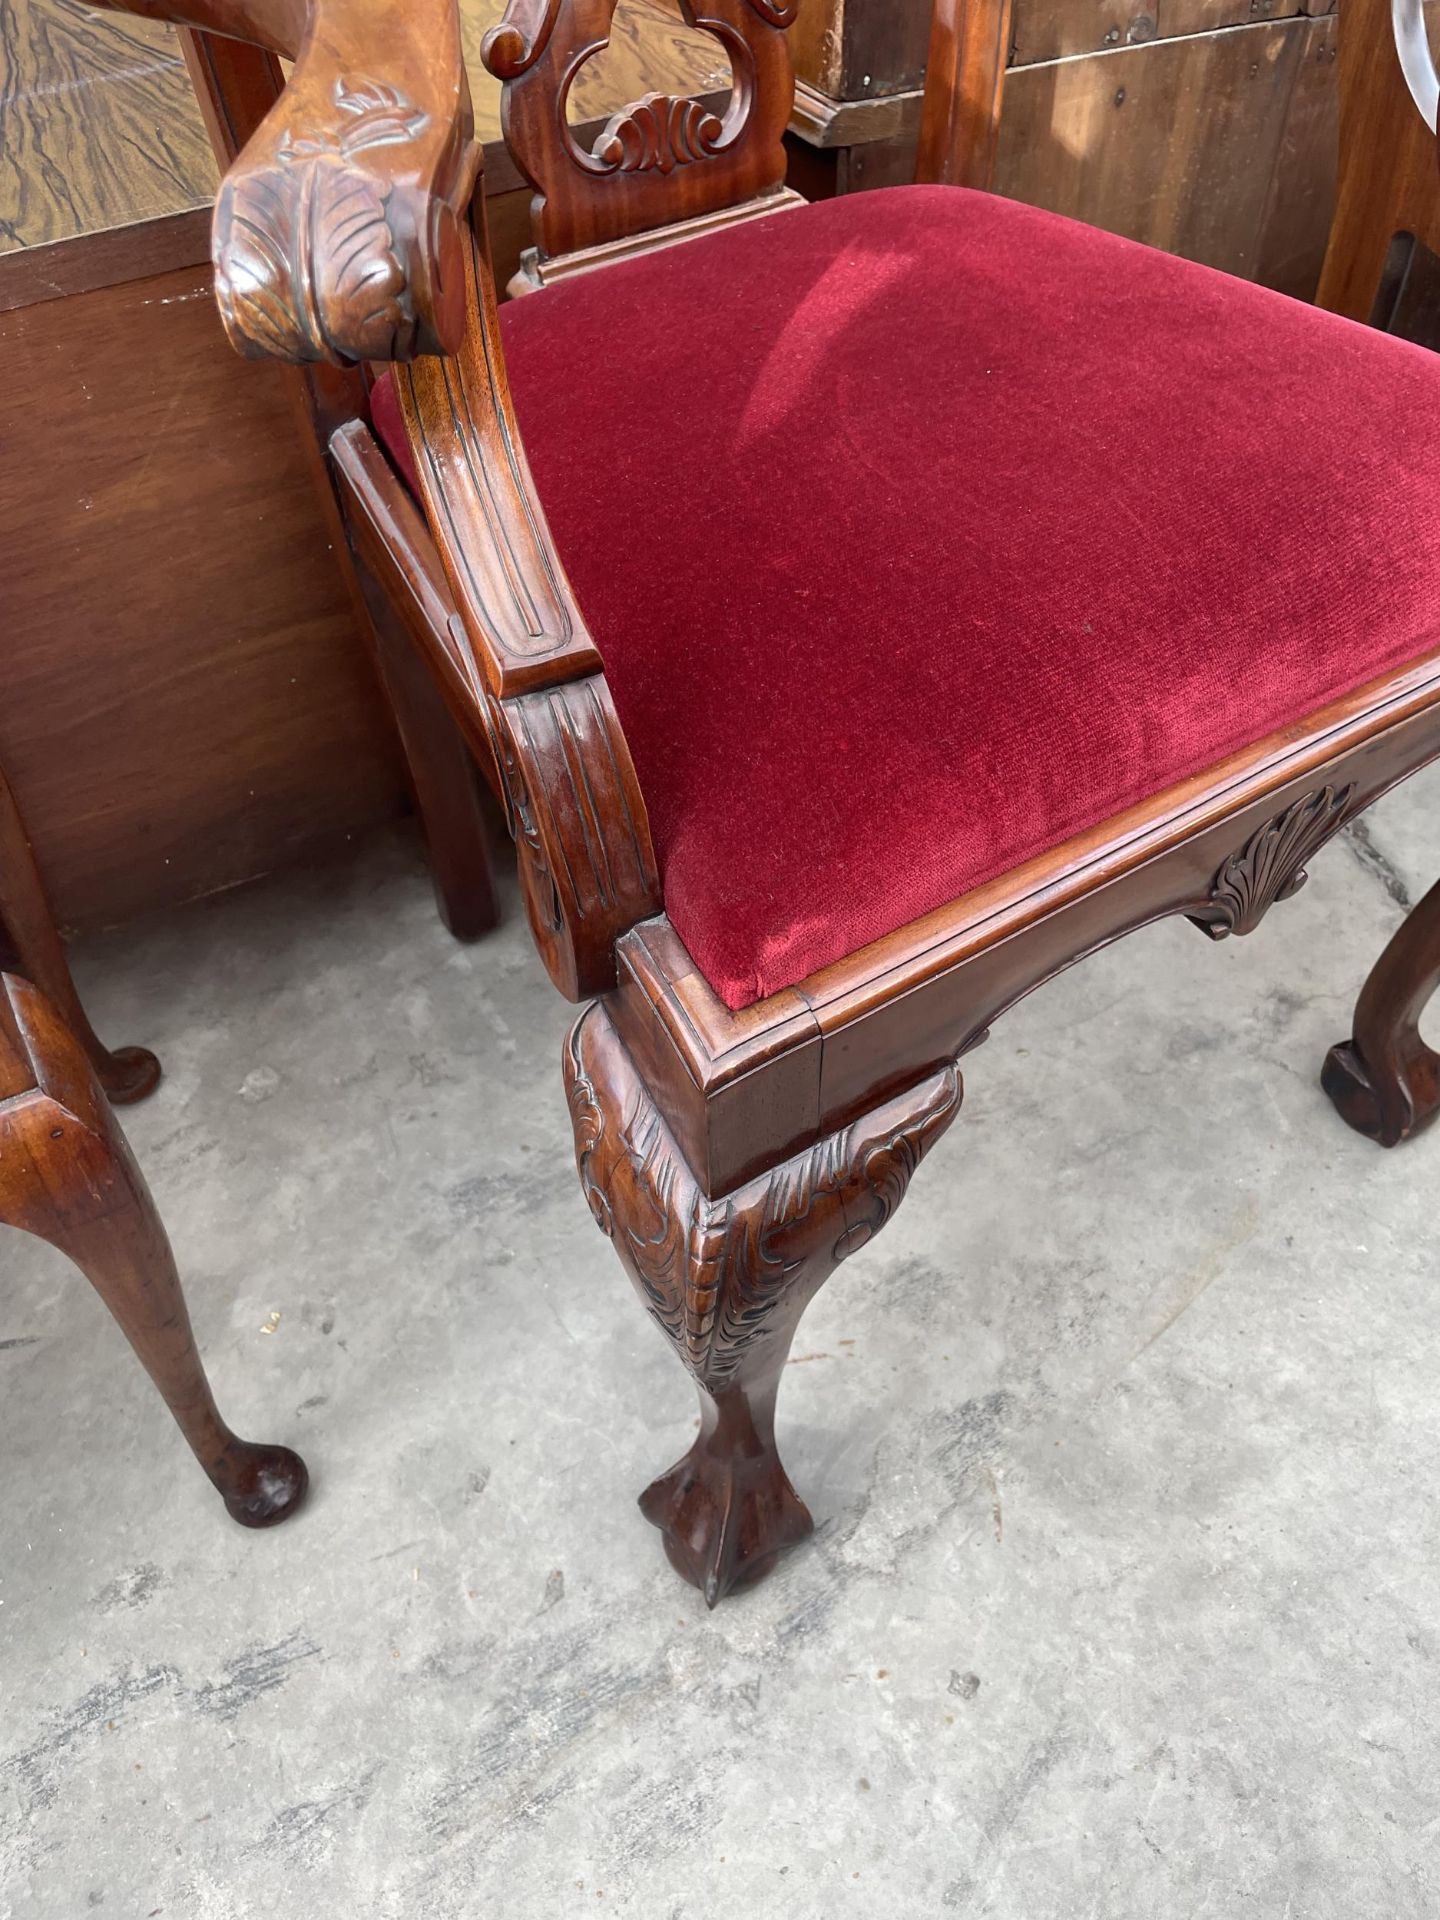 A MAHOGANY CHIPPENDALE STYLE CARVER CHAIR ON BALL AND CLAW FRONT FEET - Image 4 of 4